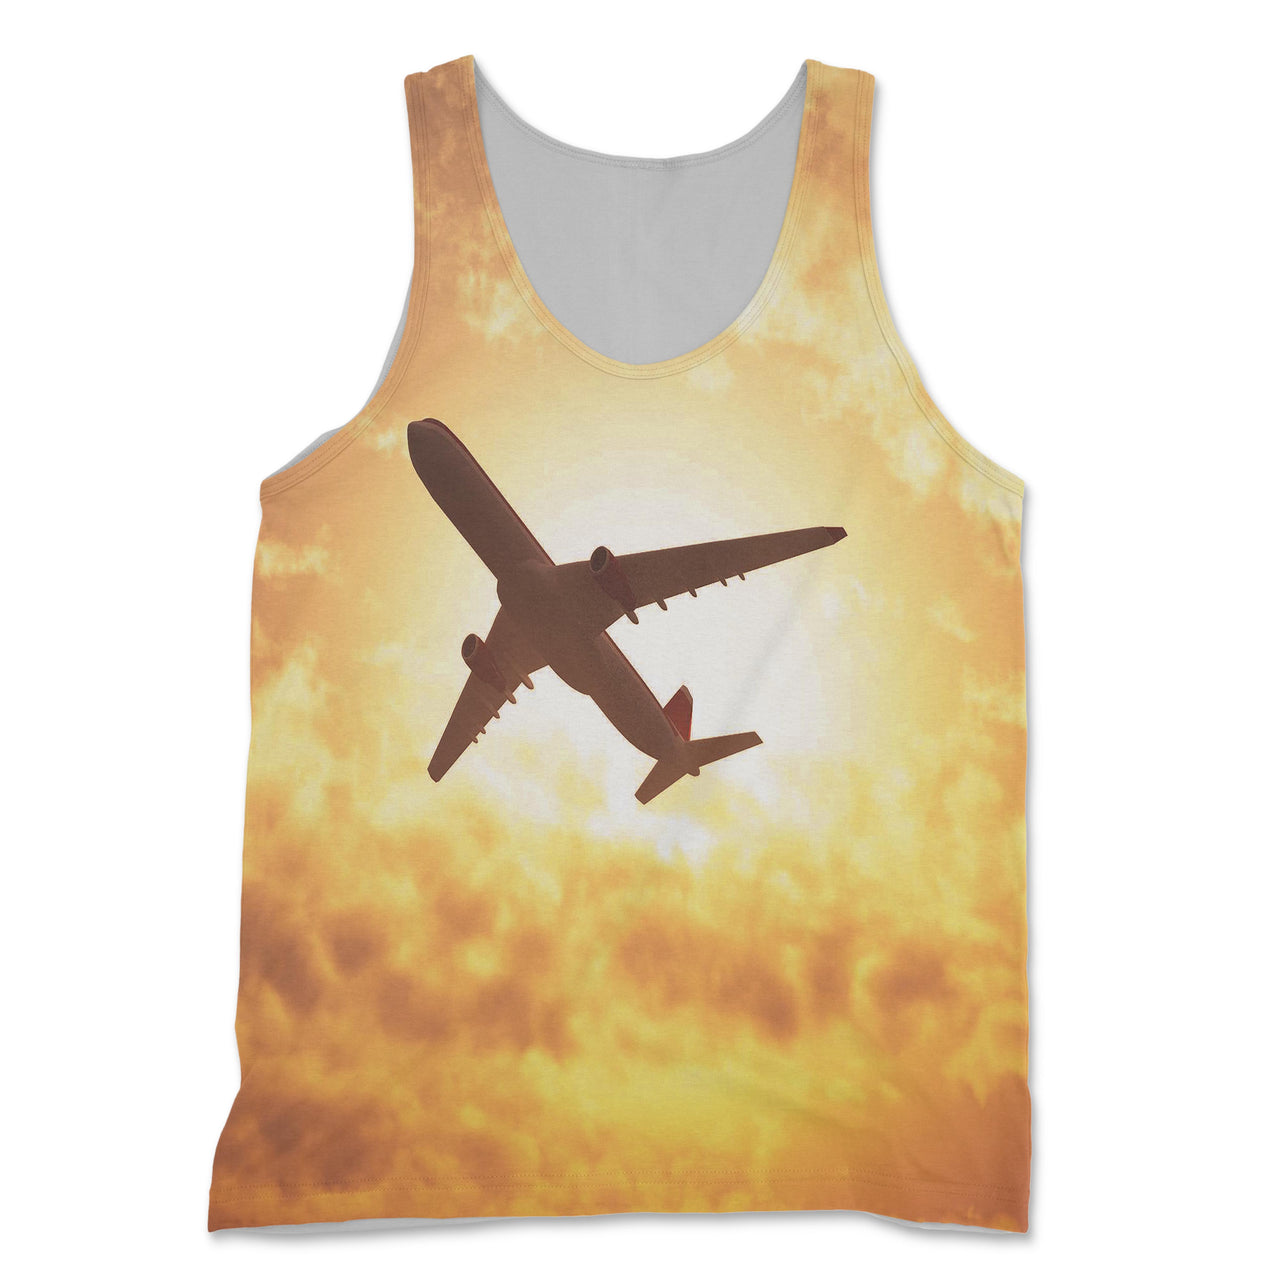 Plane Passing By Designed 3D Tank Tops